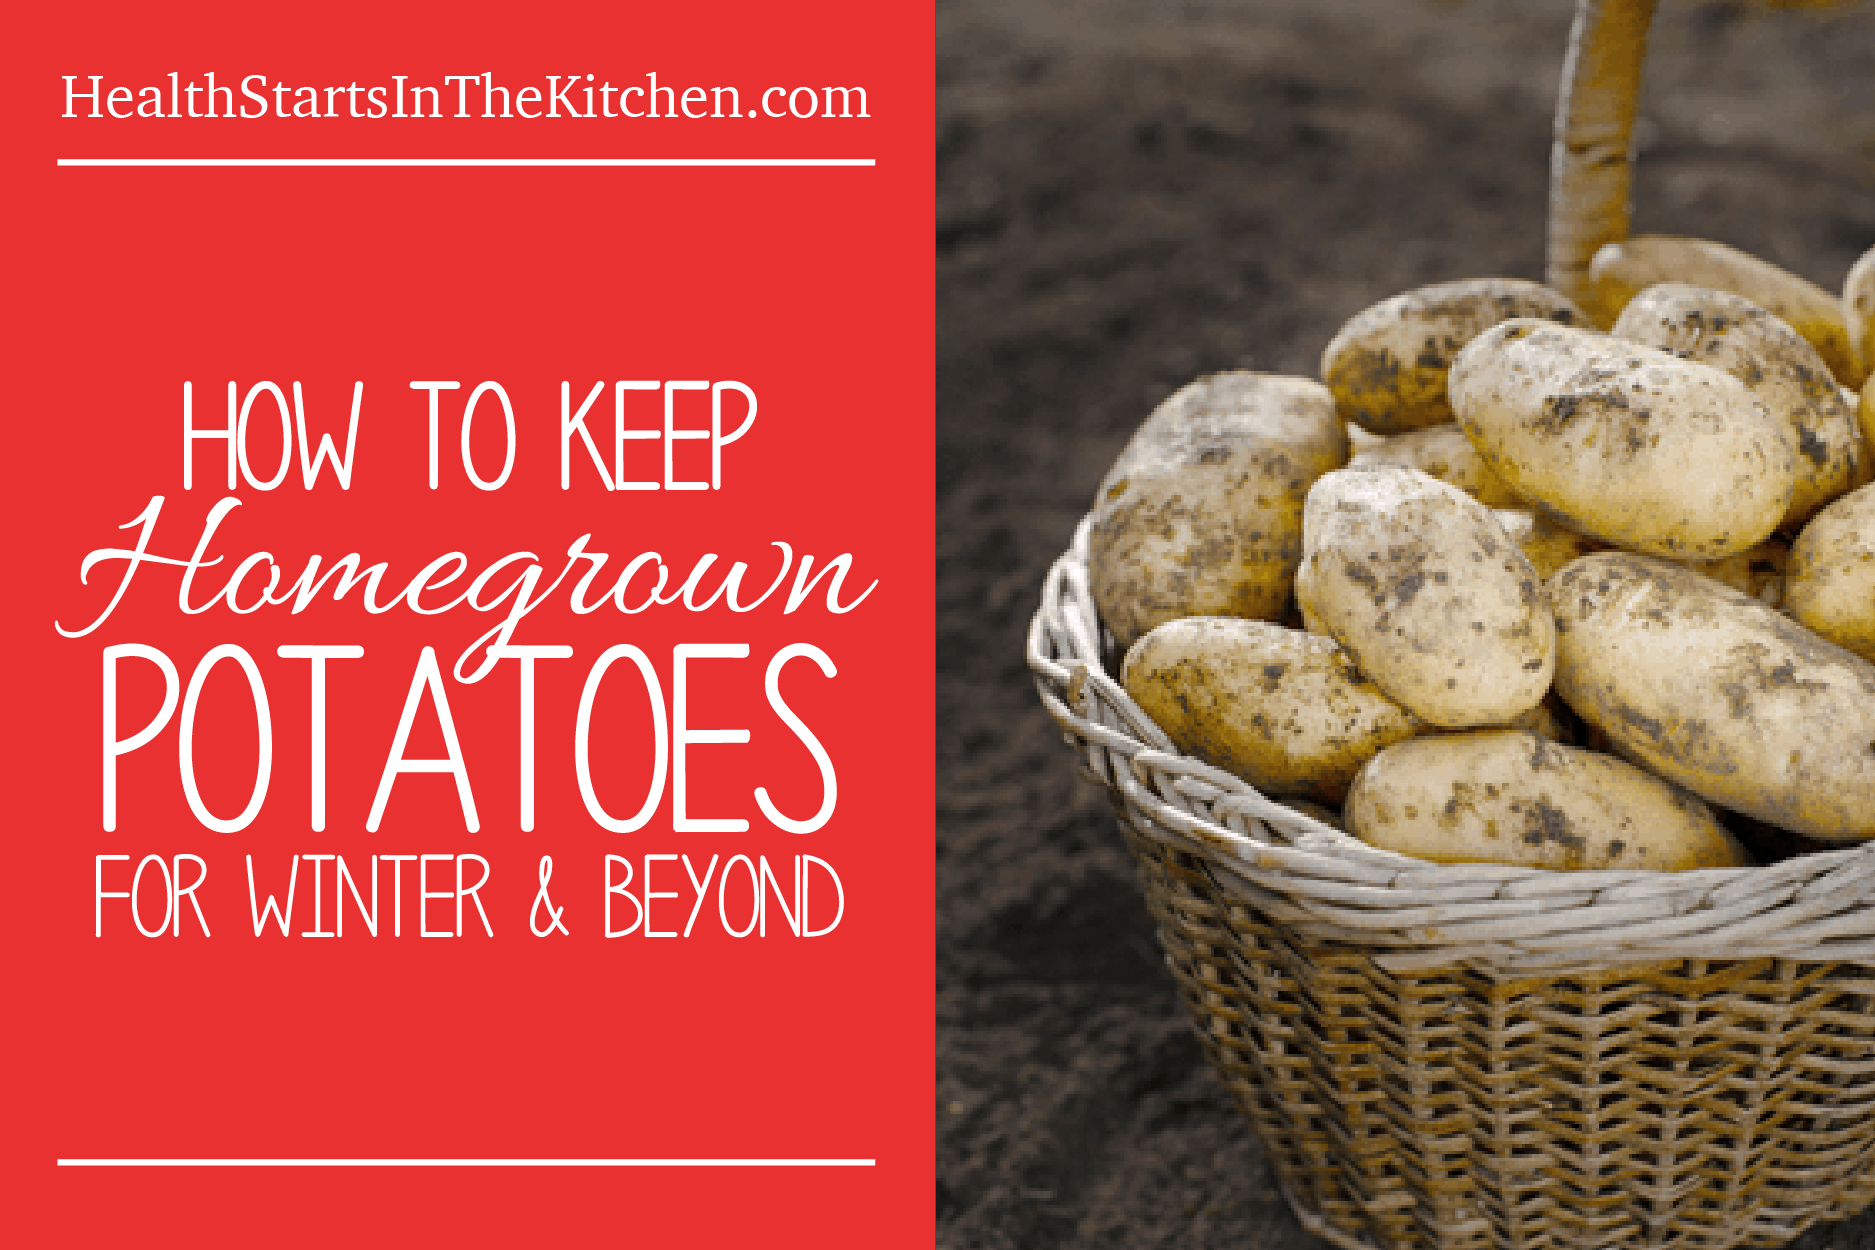 How to keep homegrown potatoes for winter and beyond